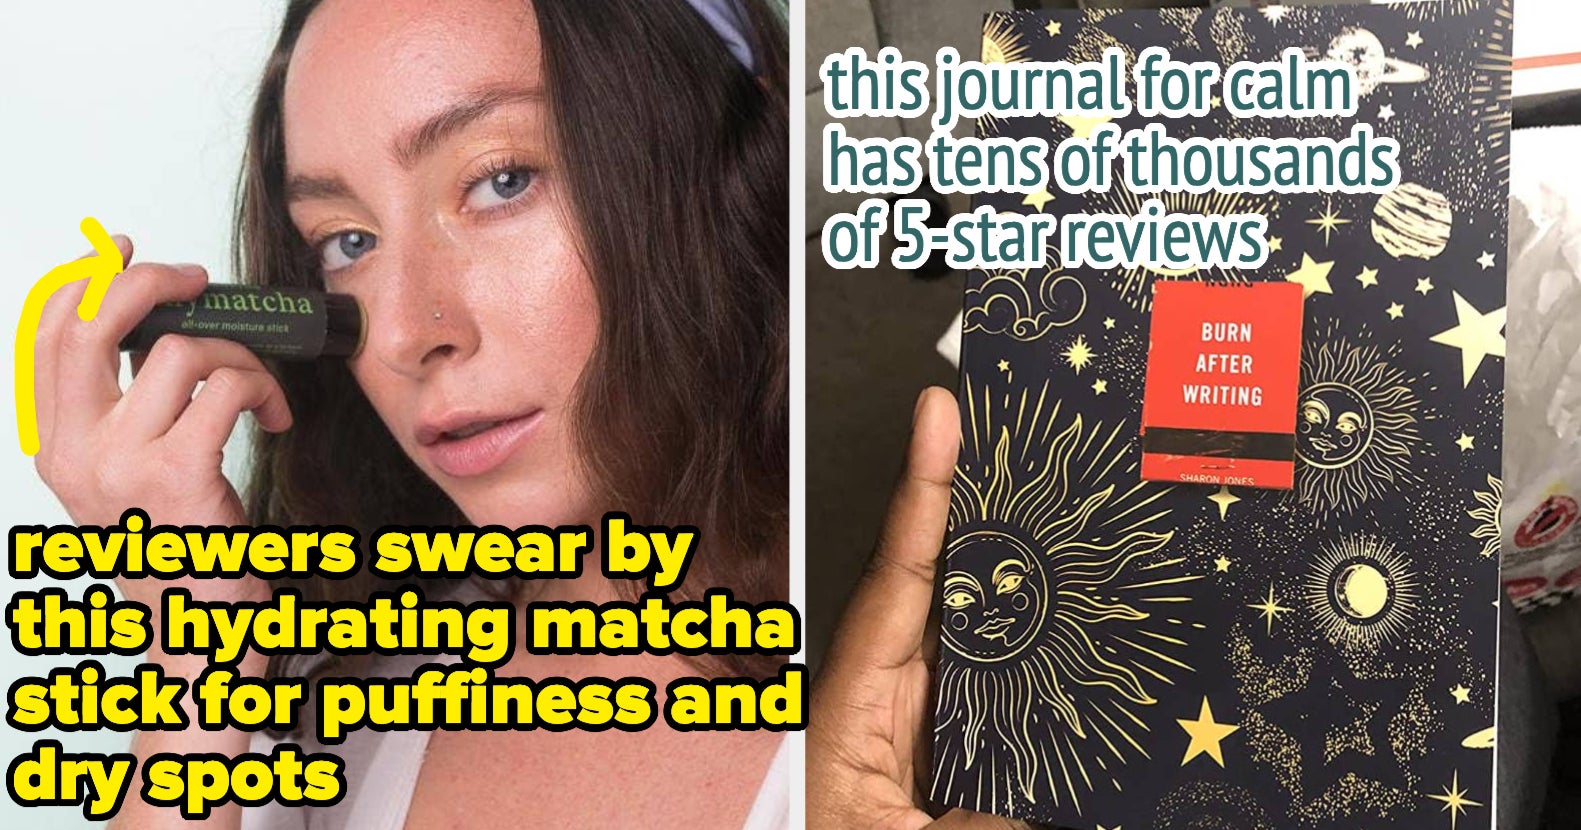 39 TikTok-Famous Products That Are Actually Worth It, According To Reviewers